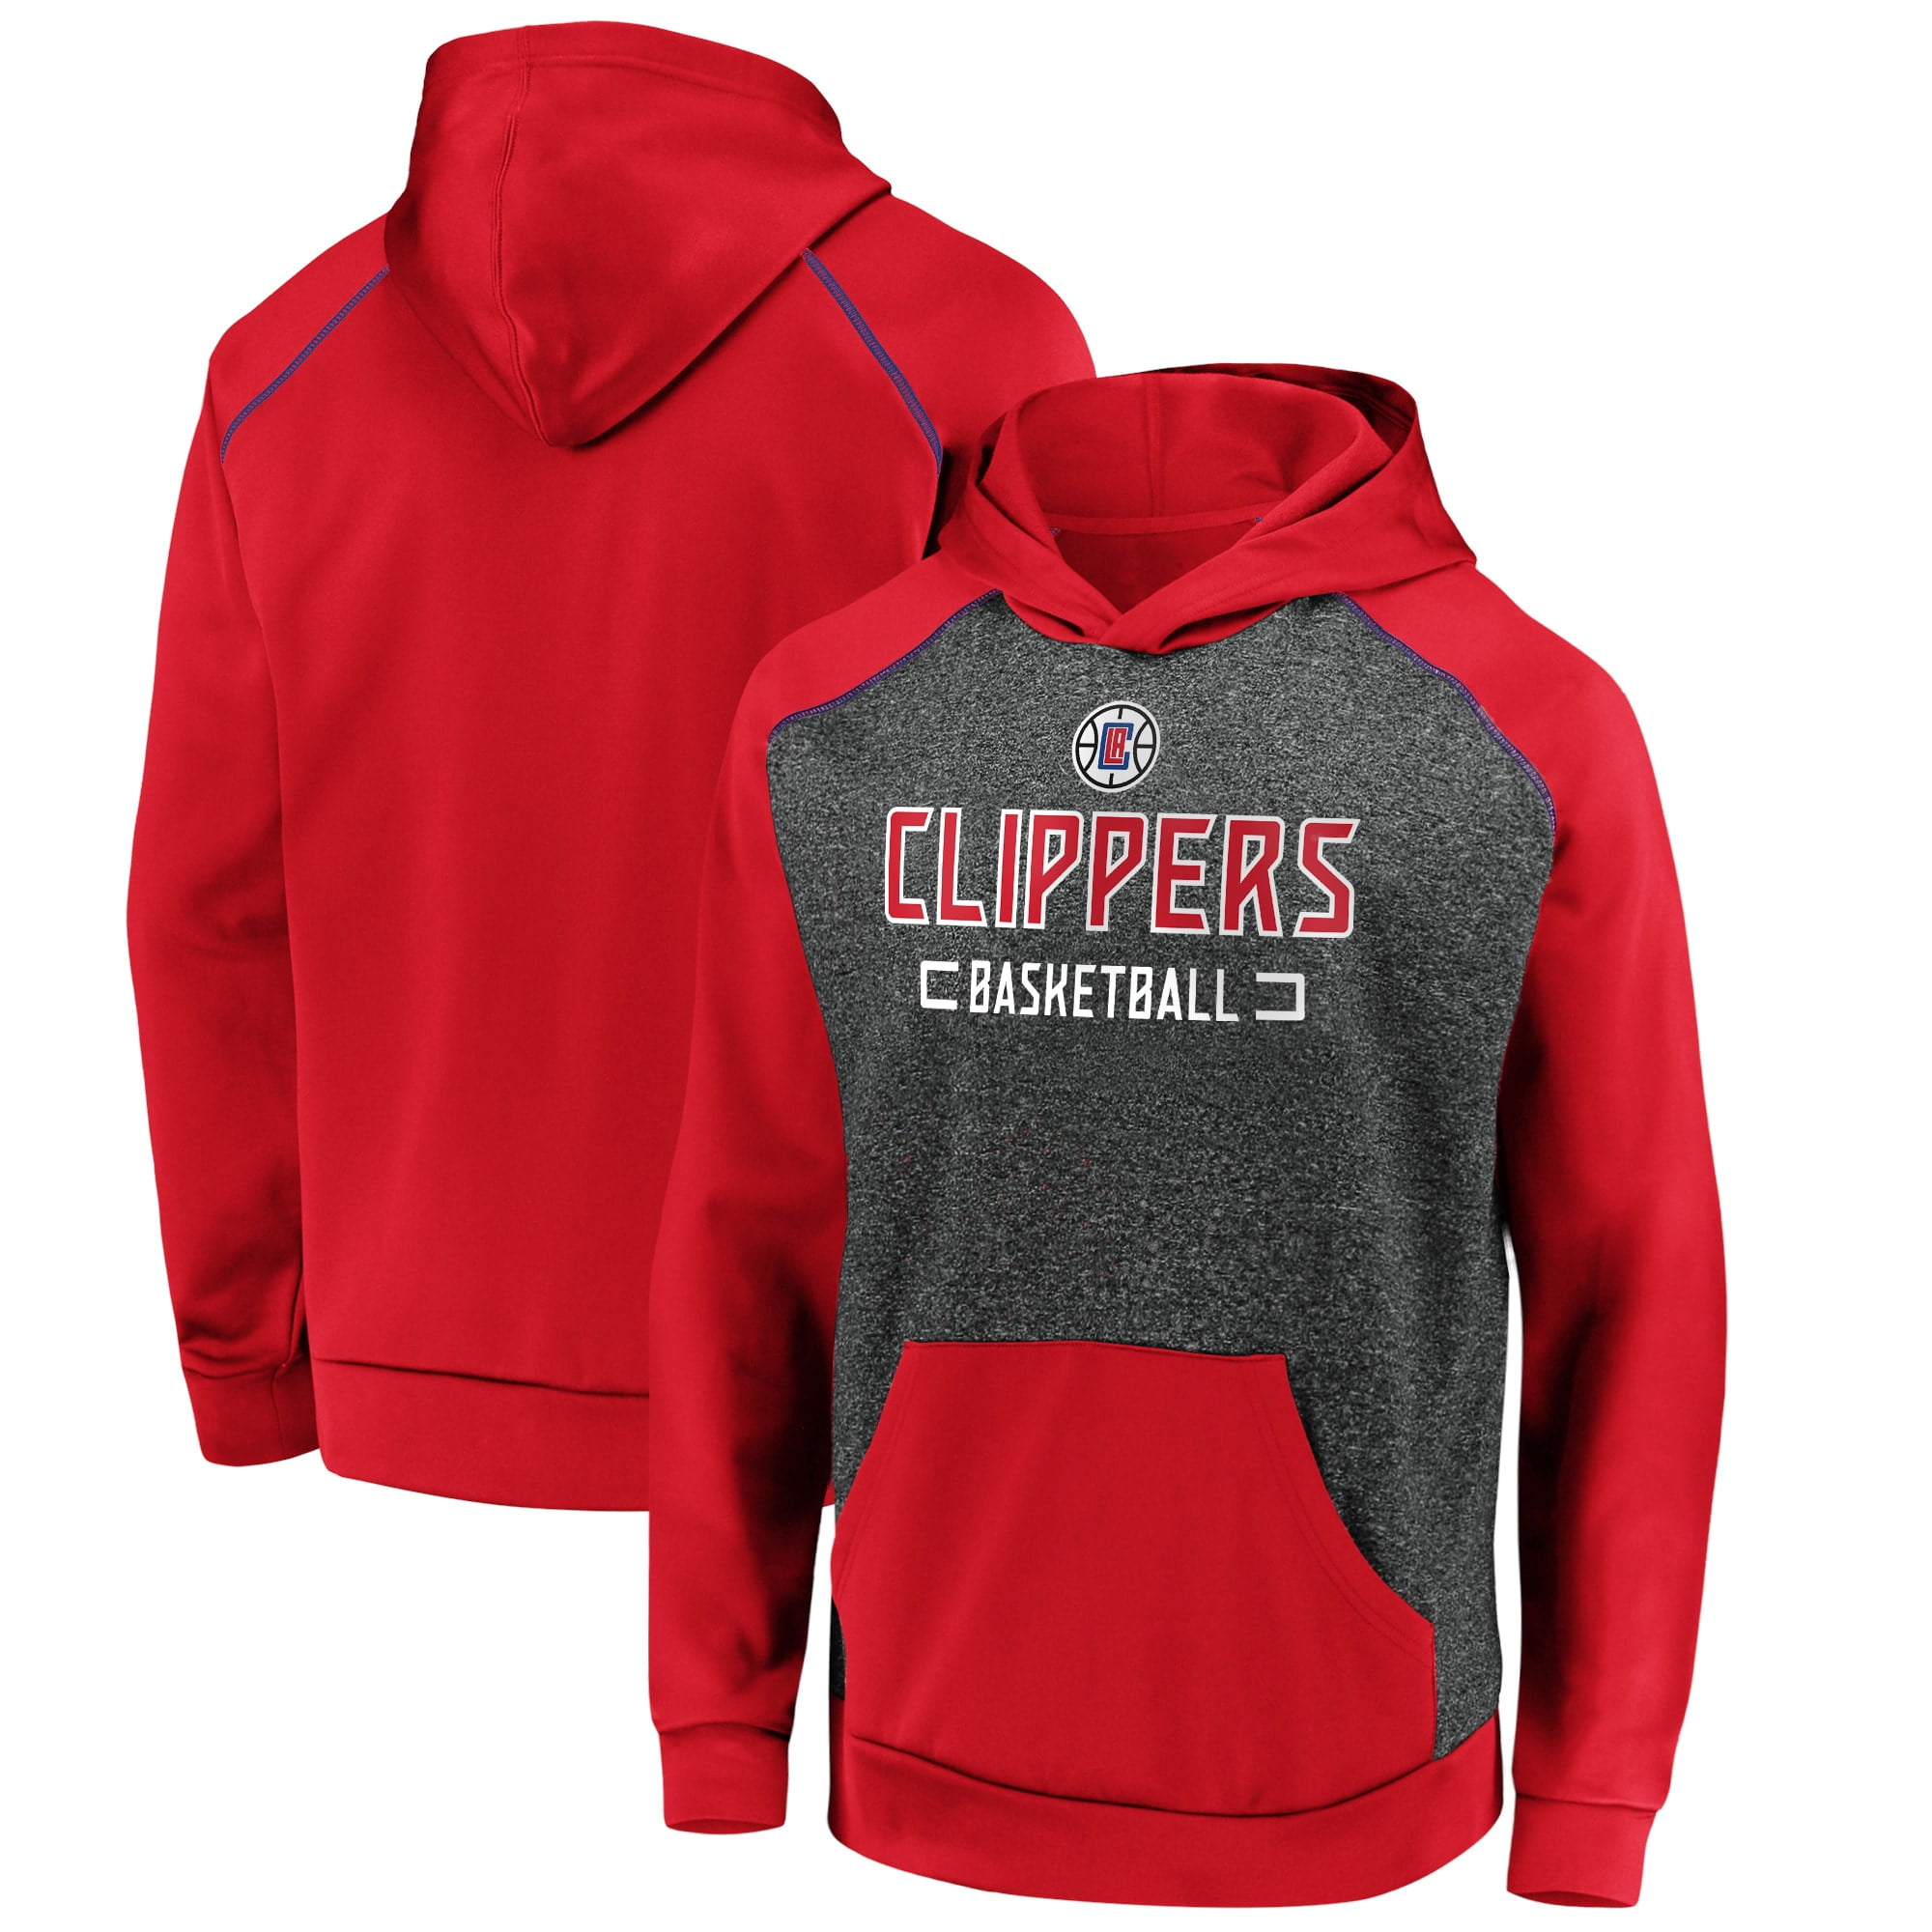 Men's Fanatics Branded Heathered Charcoal/Red LA Clippers Game Day ...